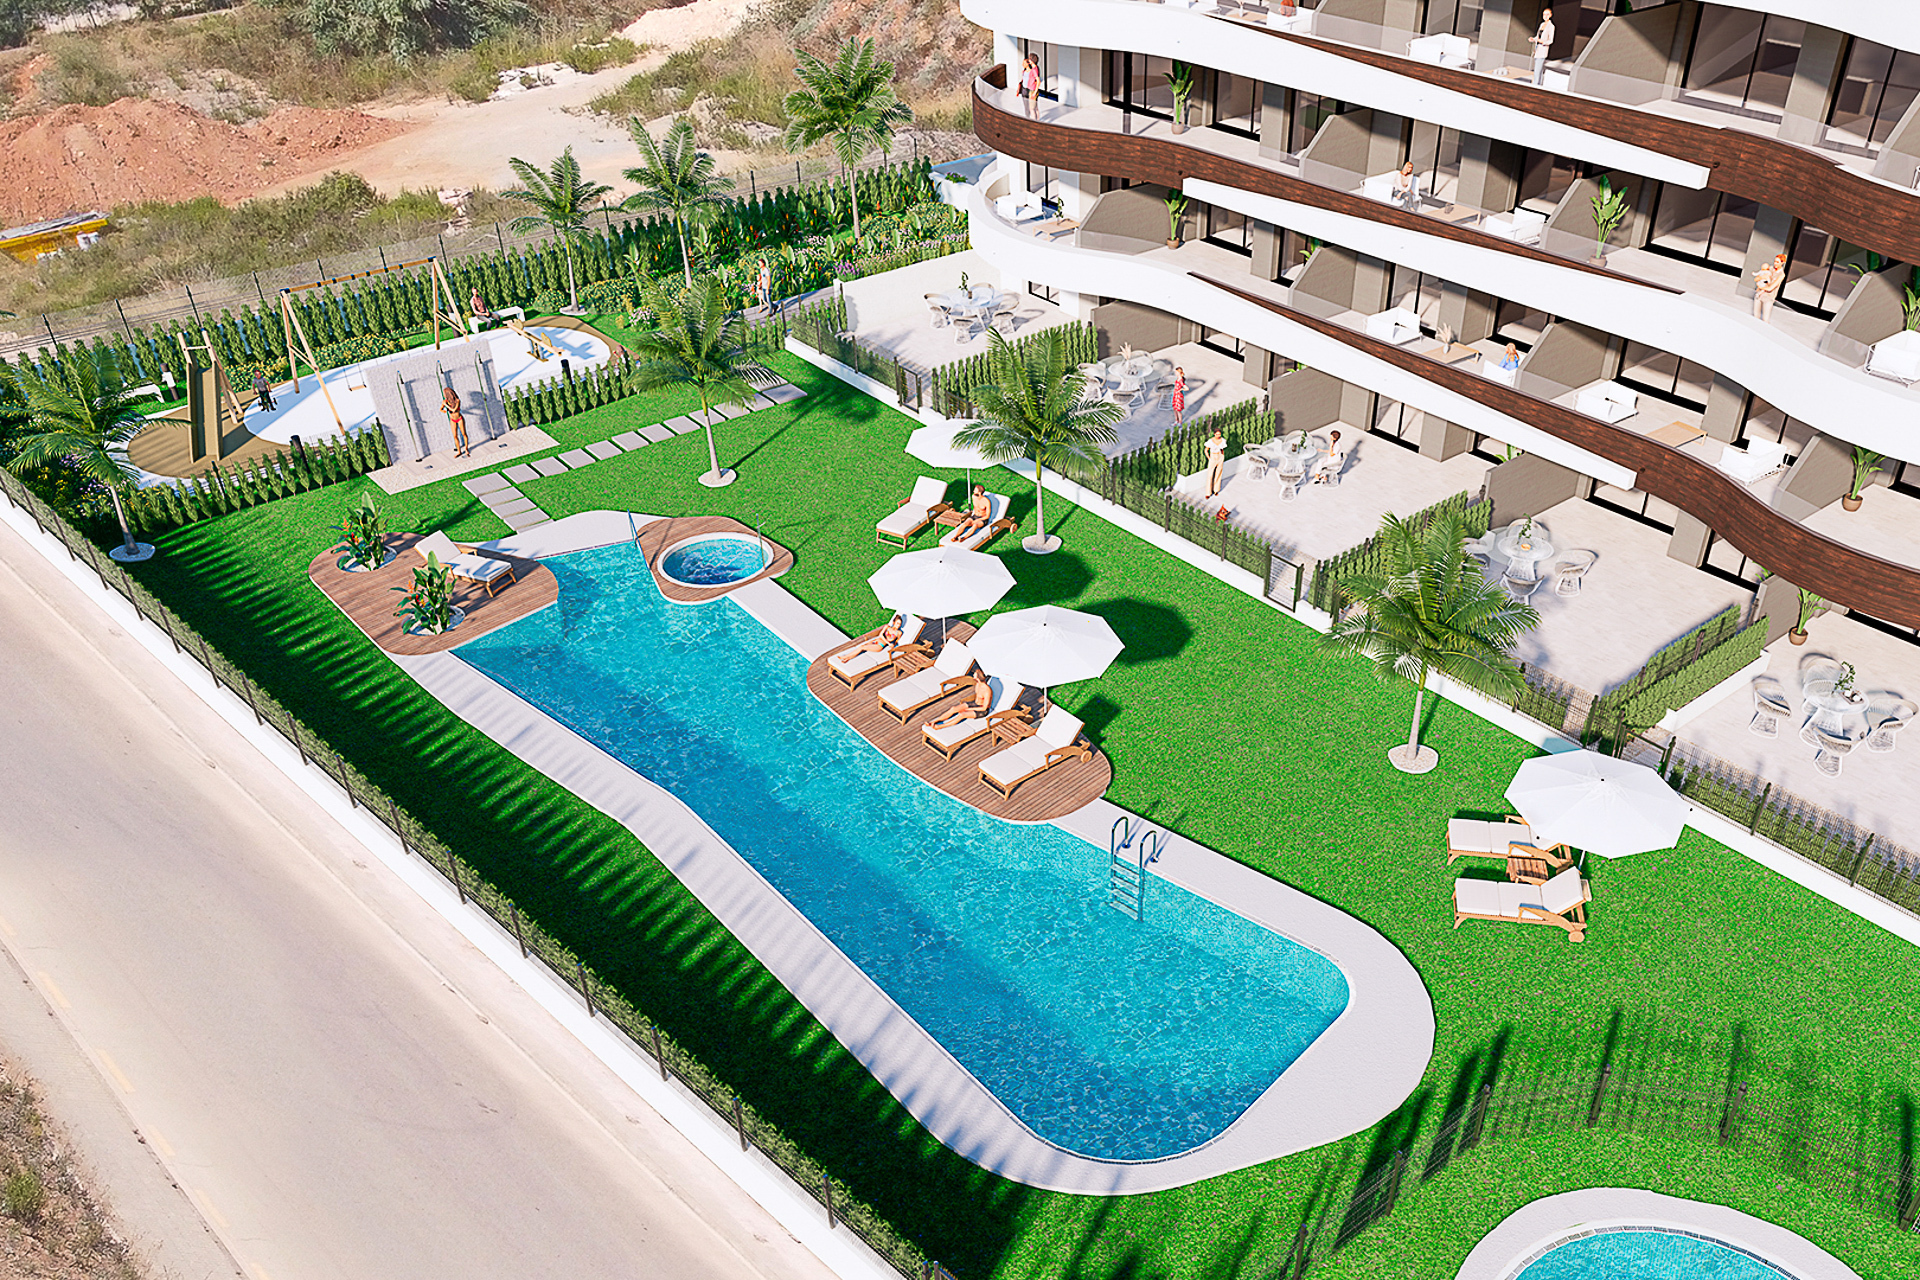 Exclusive new construction: 3rd floor flat with 2 bedrooms, parking and community pool, 07560 Sa Coma (Spain), Apartment